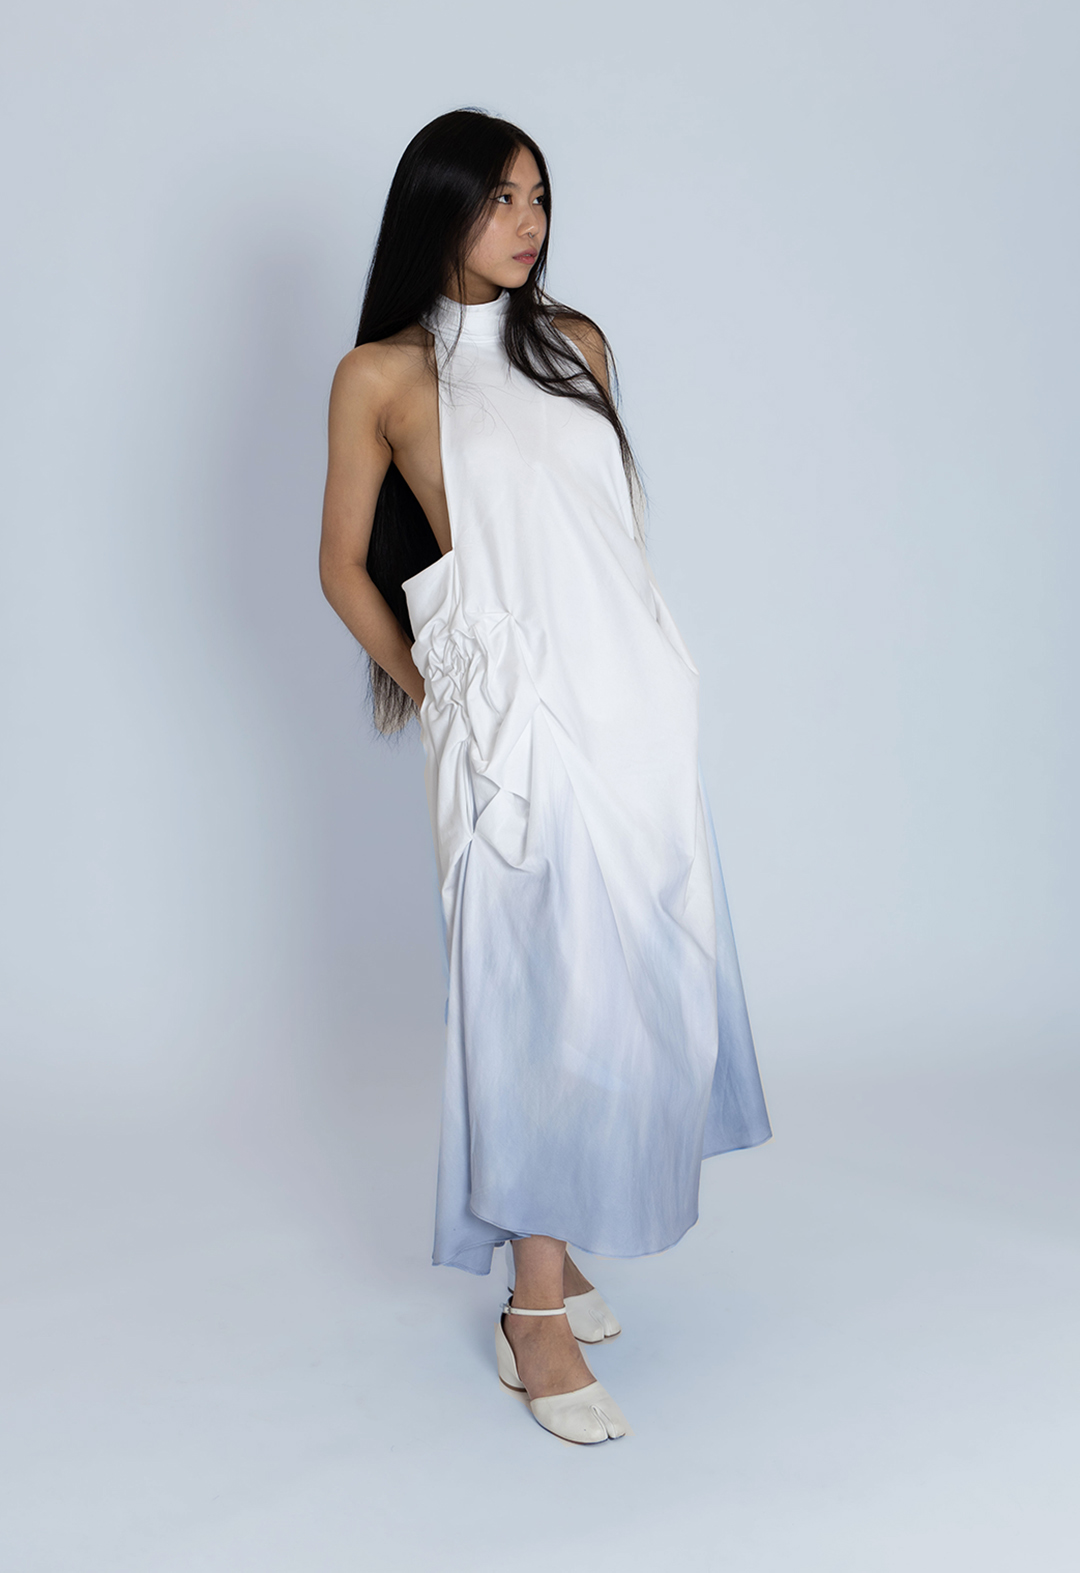 A model presents the front view of a white cotton dress dyed blue at the bottom.